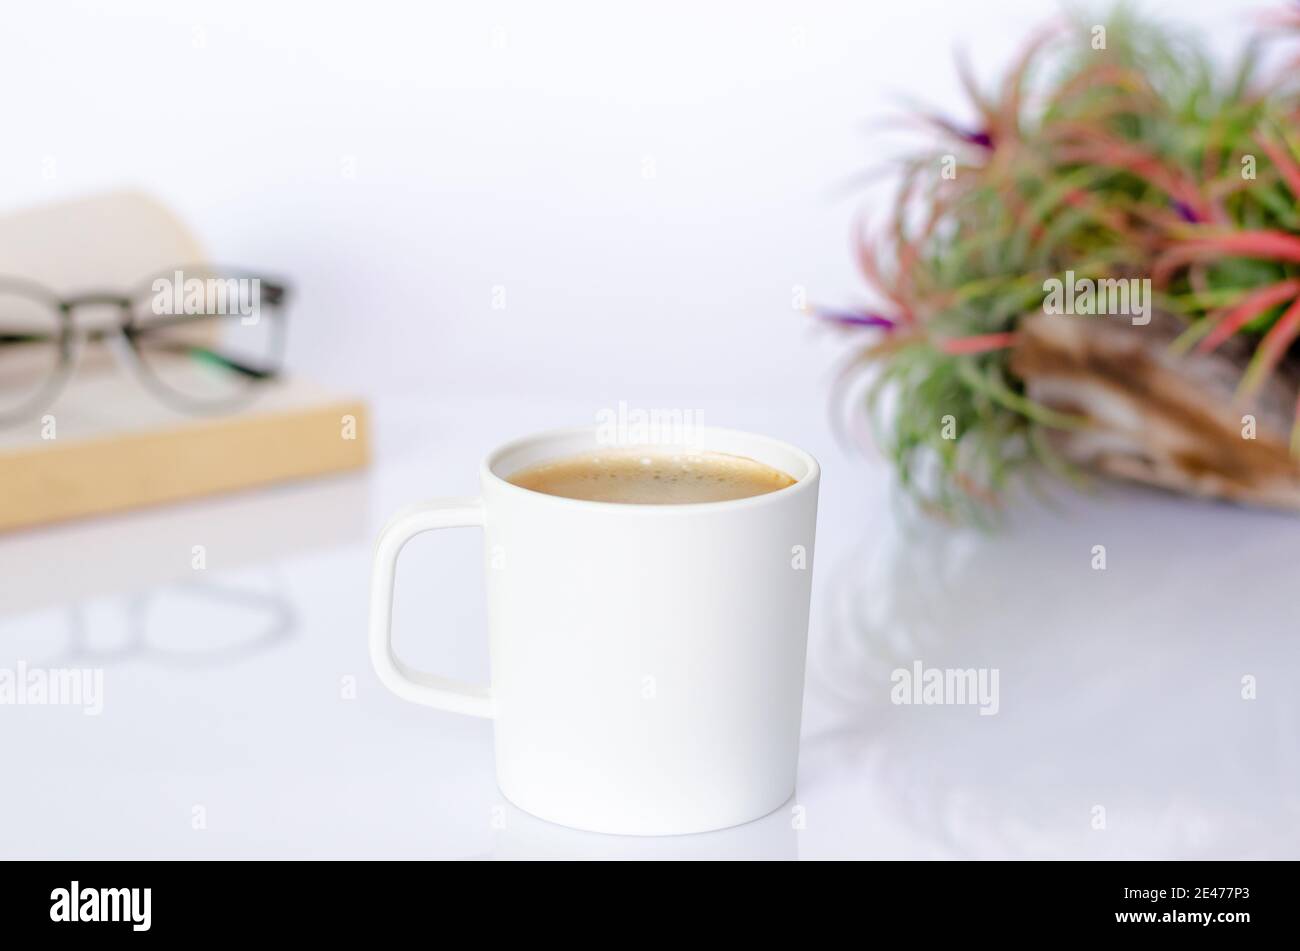 A cup of coffee on table with air plant Tillandsia, spectacles and book on white background. Stock Photo